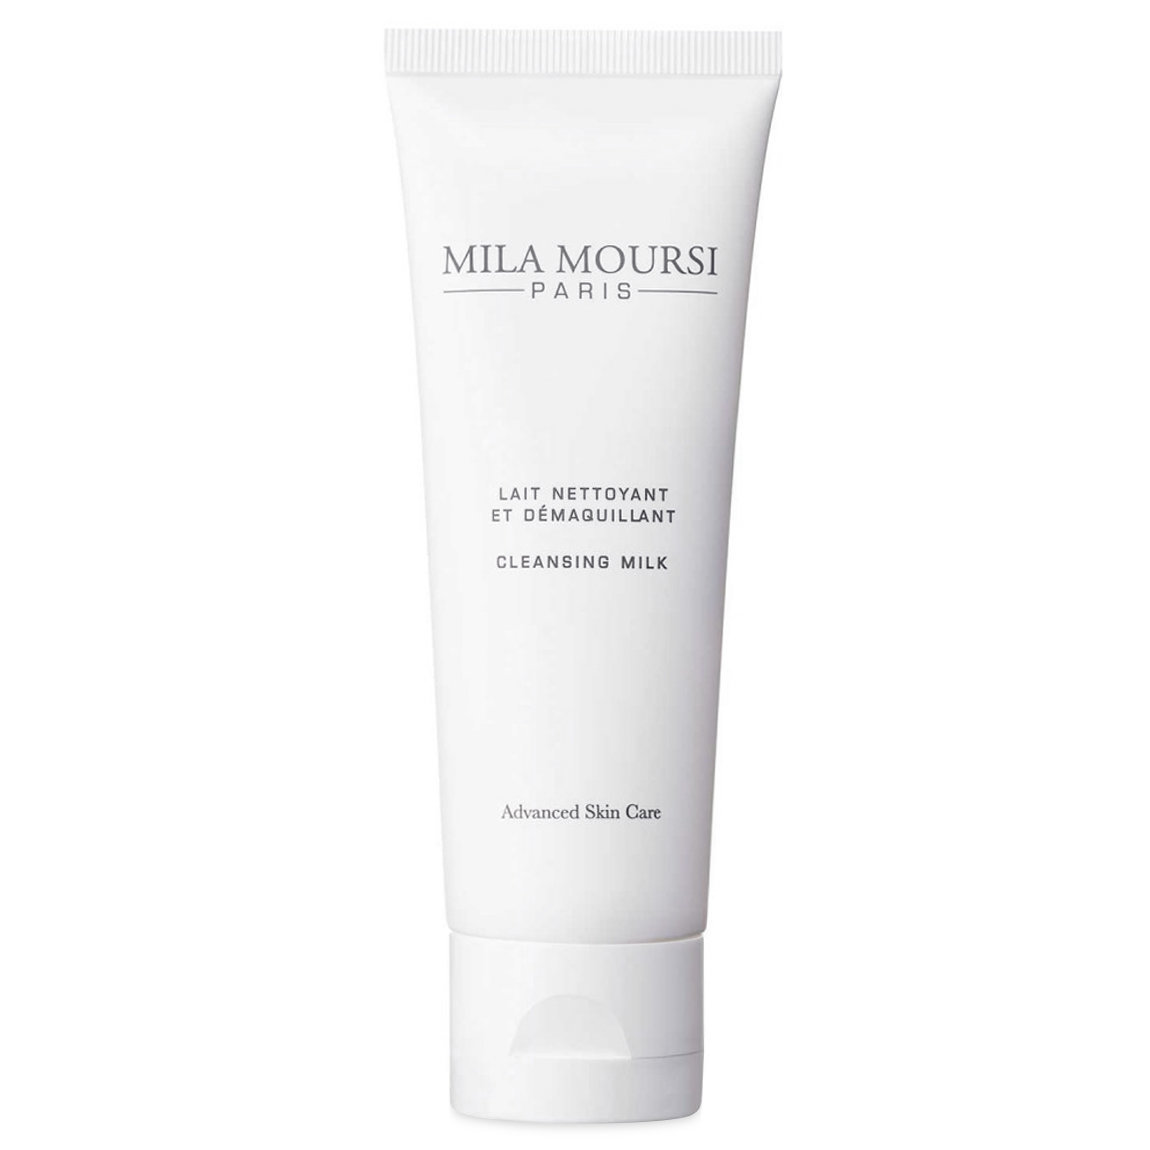 Mila Moursi Cleansing Milk 100 ml alternative view 1 - product swatch.